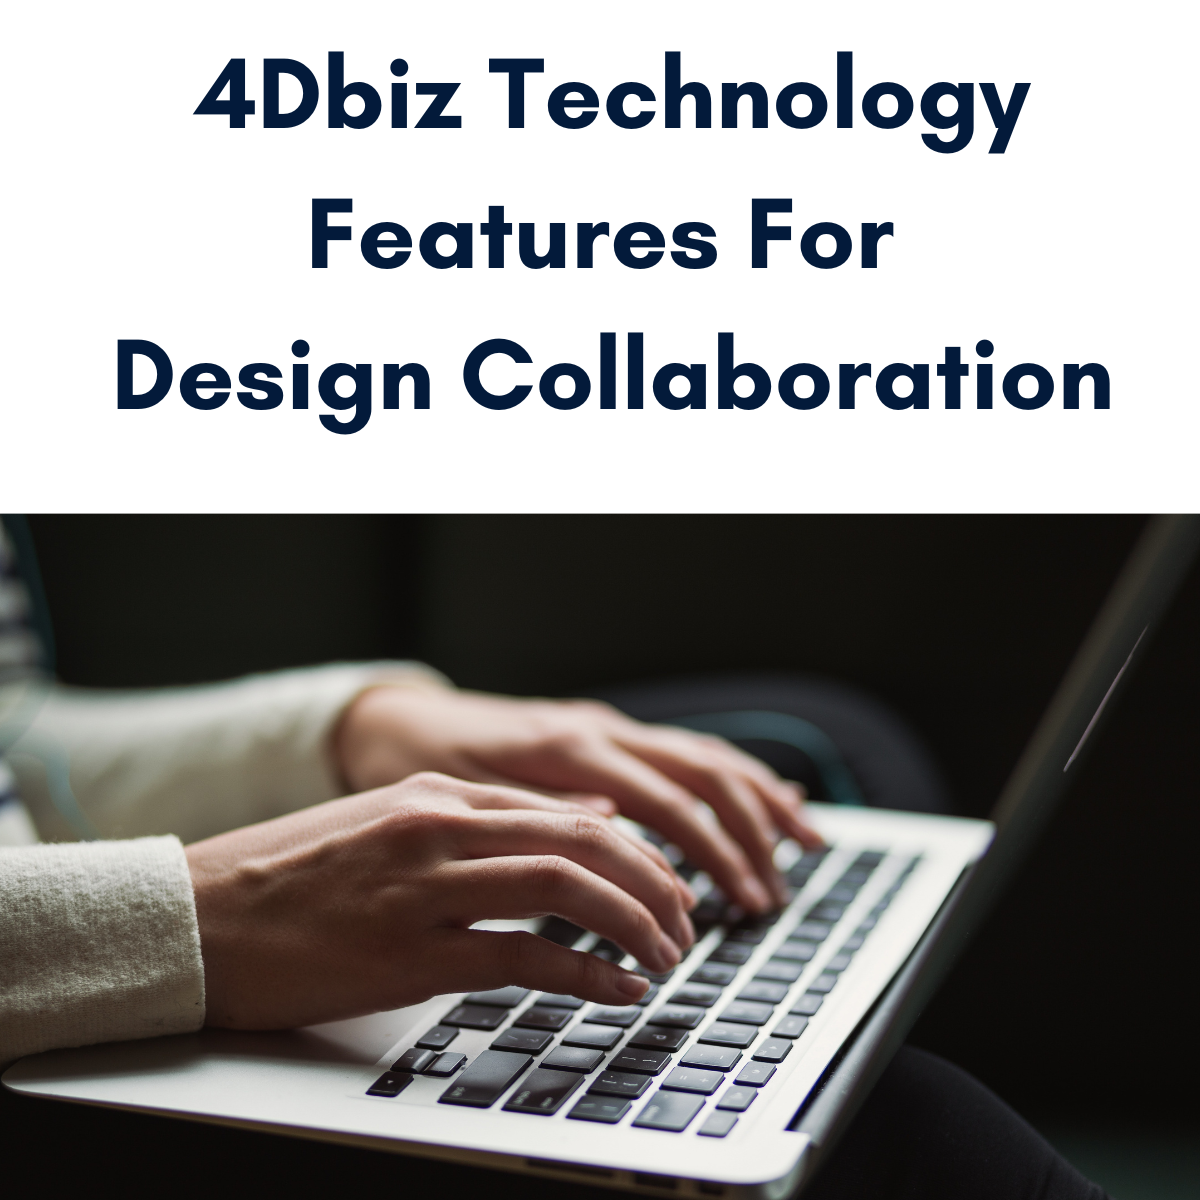 Technology Features for Design Collaboration